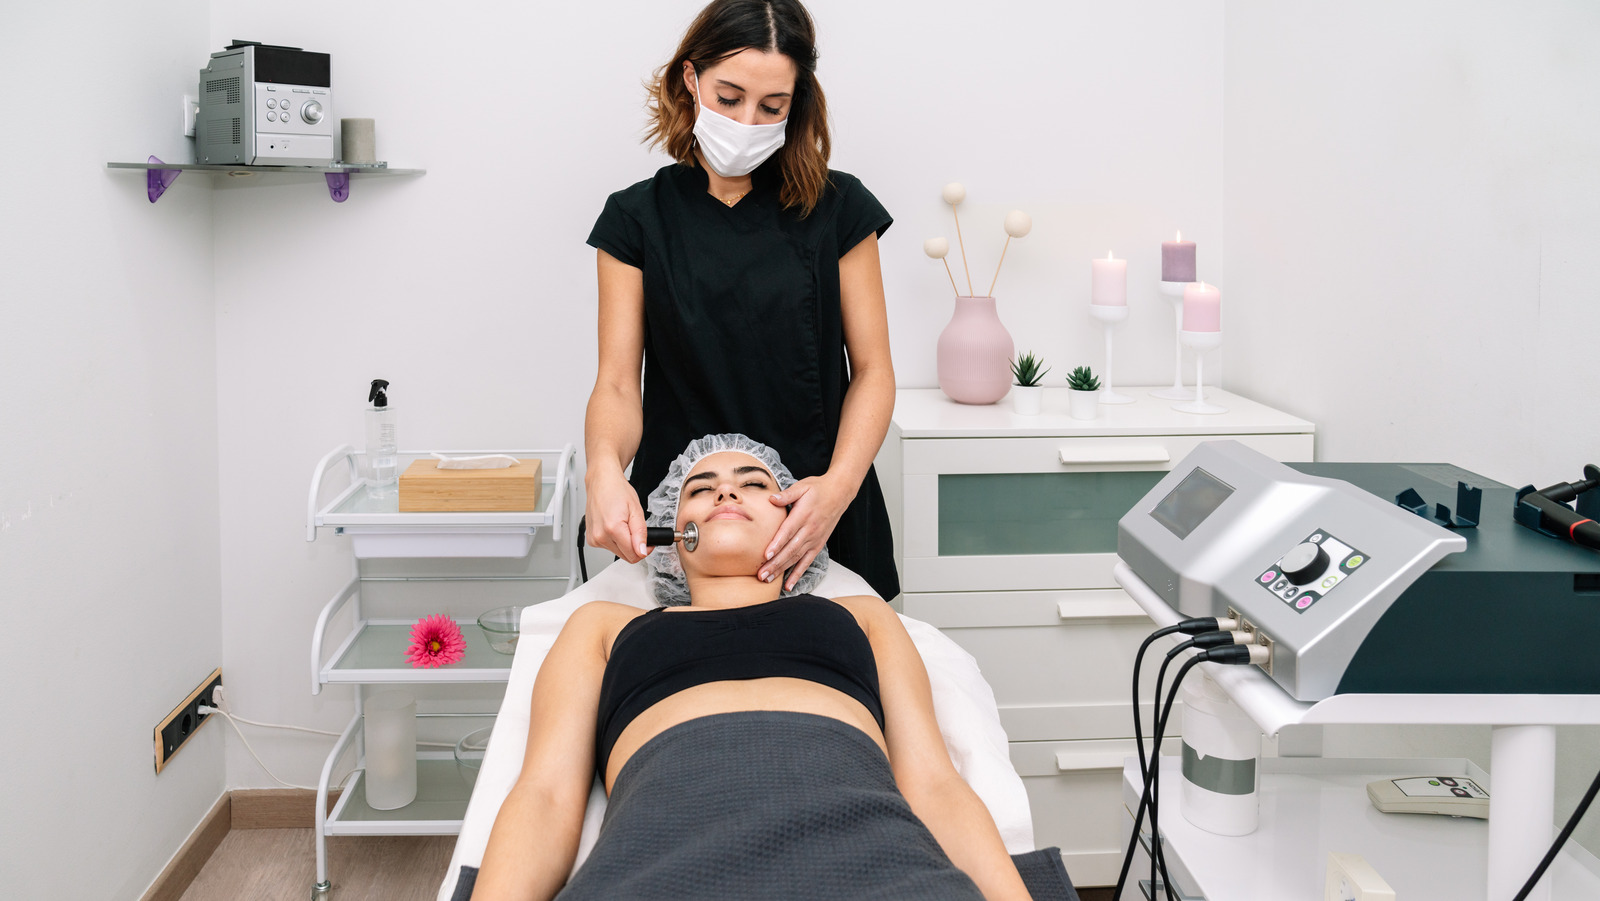 Aesthetician Vs. Esthetician: What's The Difference?